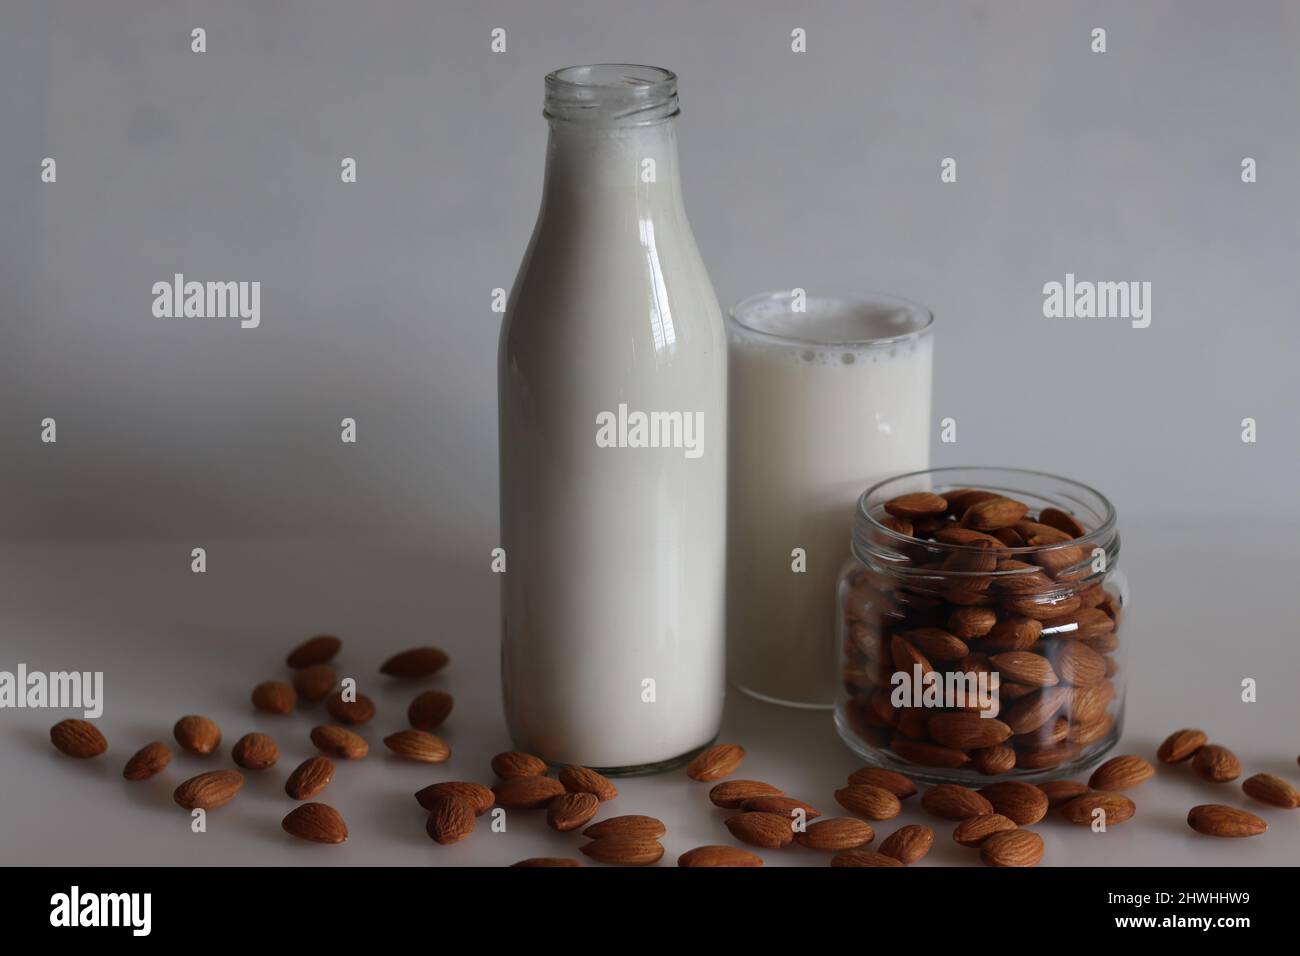 Homemade Almond milk without preservatives. Milk extracted from soaked almonds. Used for smoothies and overnight oats. Shot on white background Stock Photo